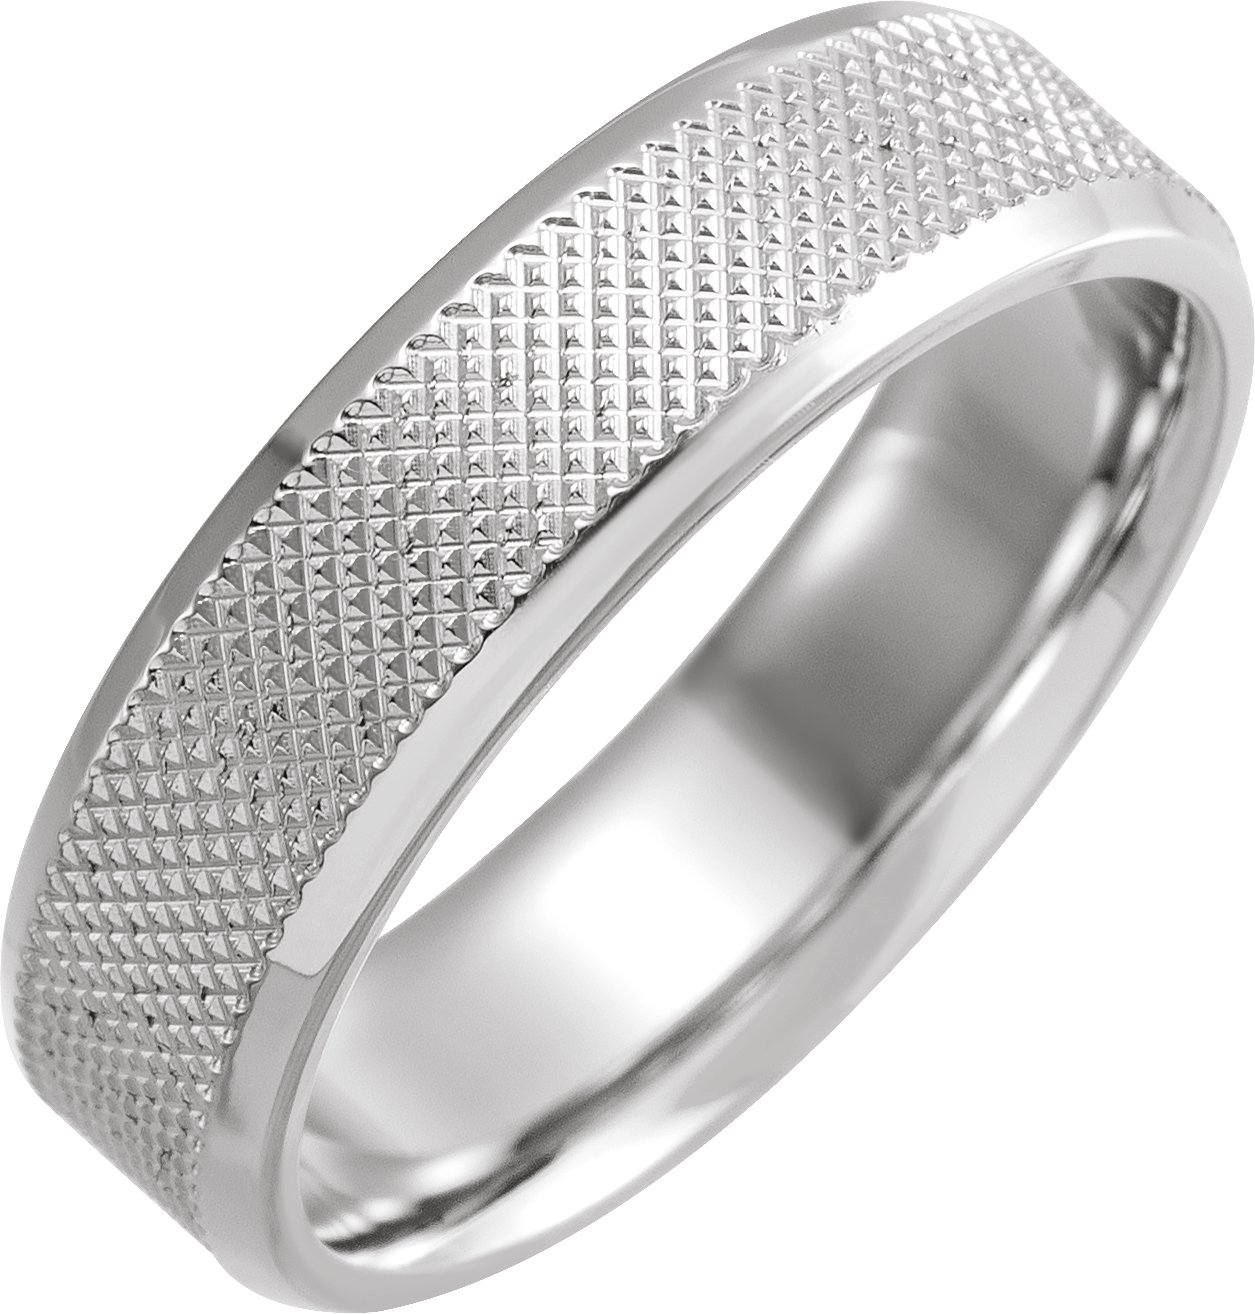 Sterling Silver 6 mm Knurled Beveled Edge Band Size 19 Ref 16531218